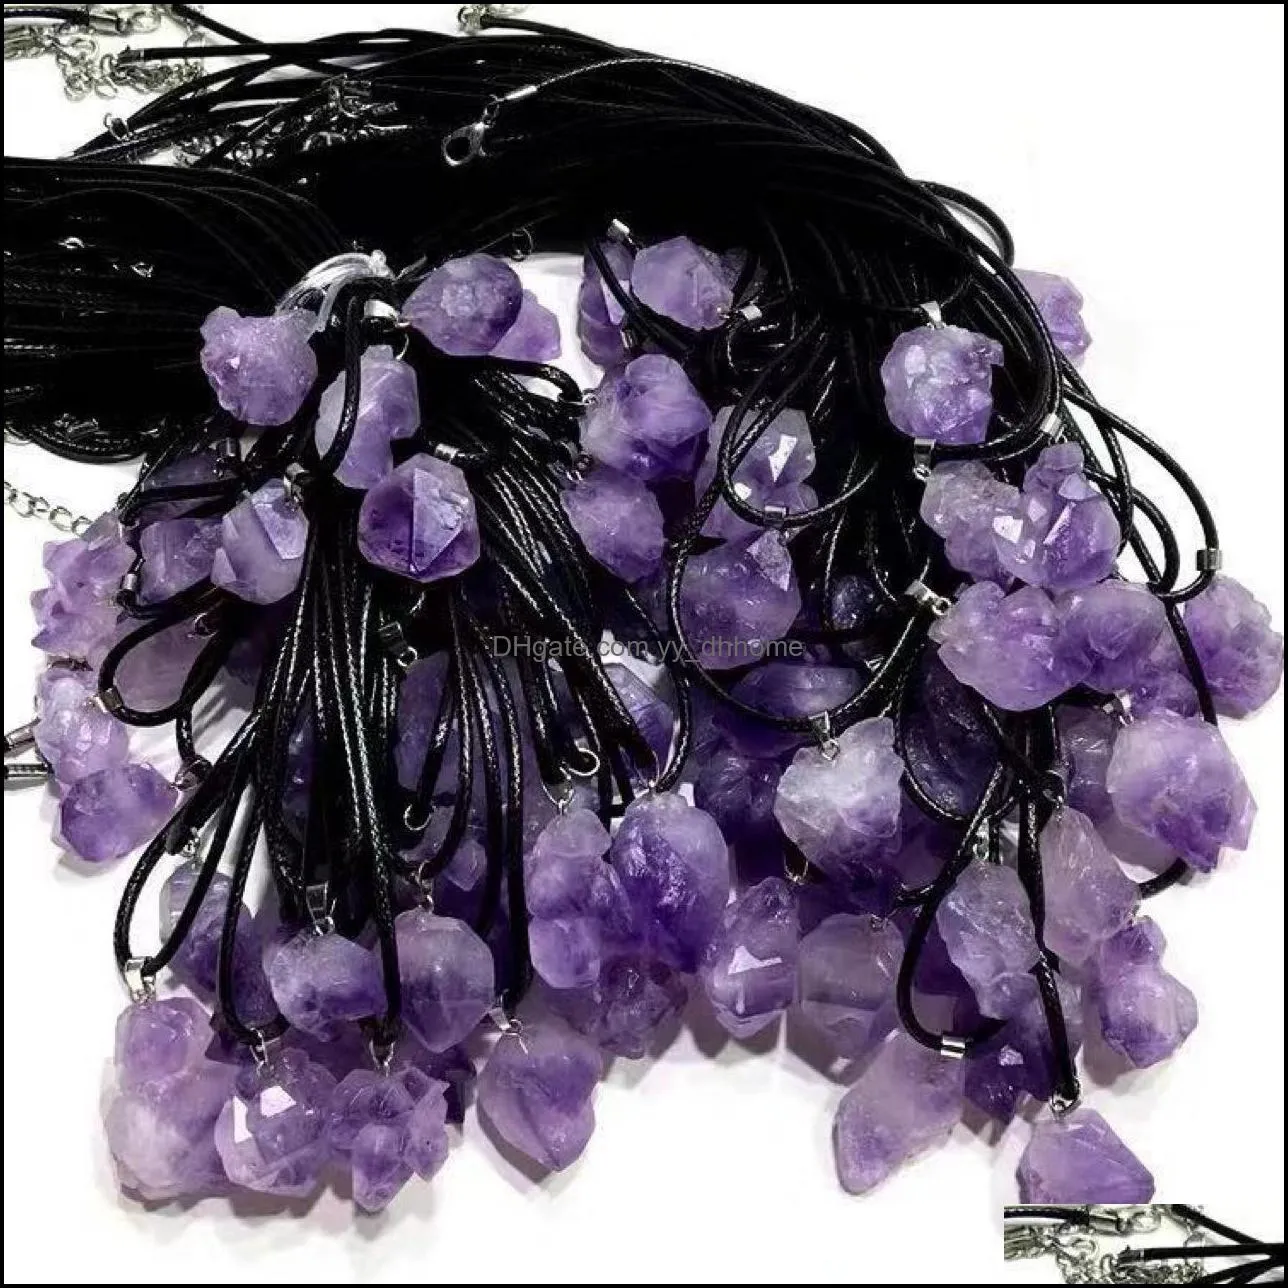 bulk natural yellow crystal stone charms amethyst irregular shape pendants for necklace earrings jewelry makin yydhhome